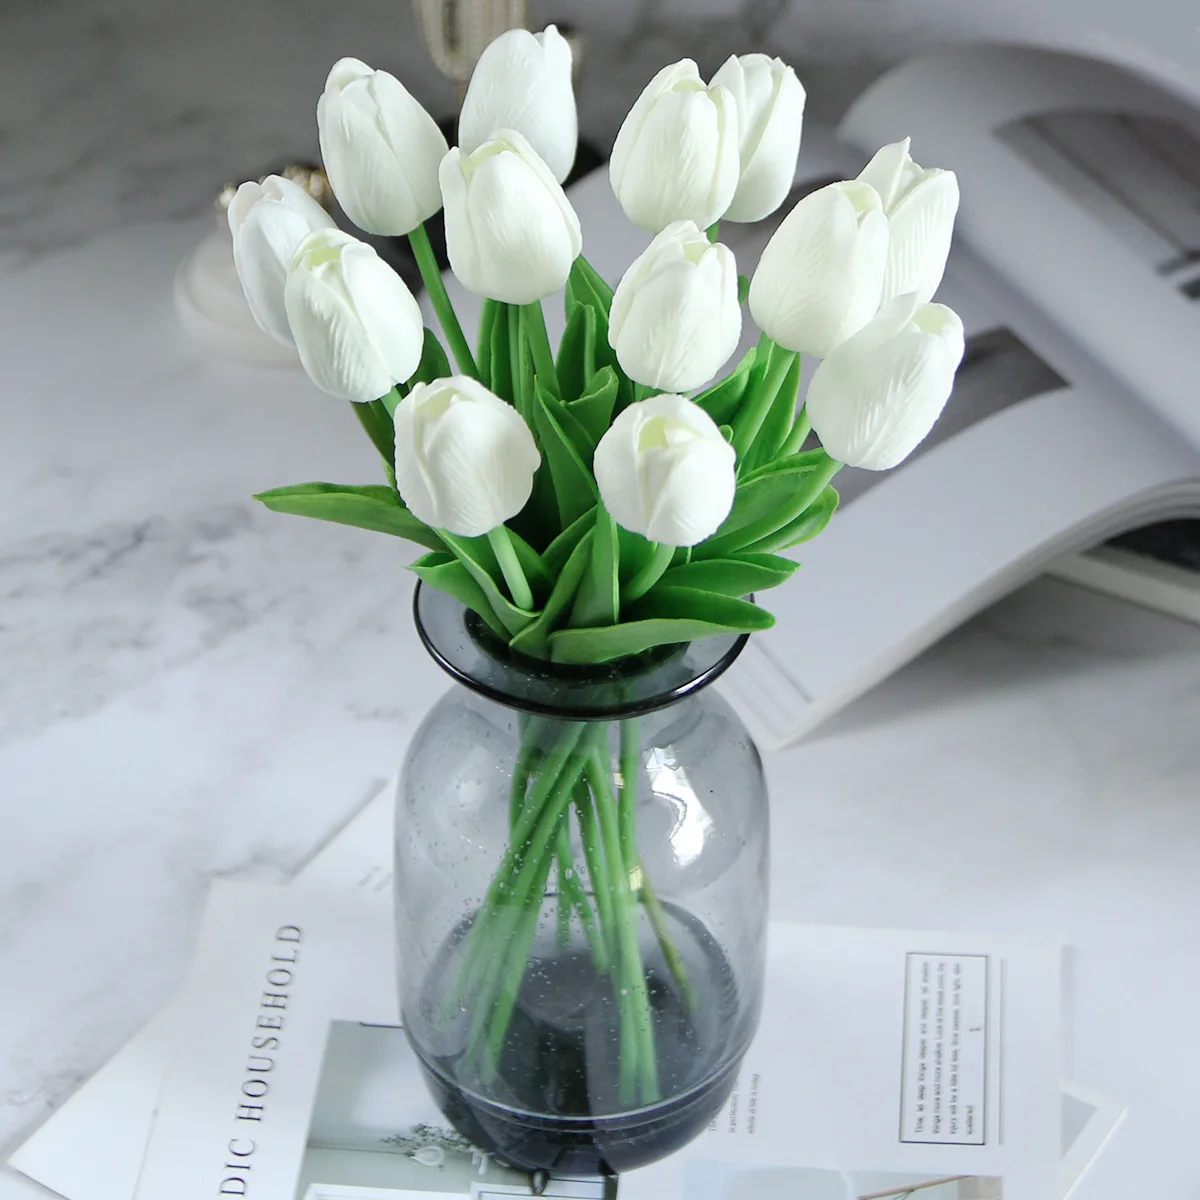 

Get Your Home Blooming With Wholesale Artificial Flowers And Green Plants Various Colors Of Simulated Tulips